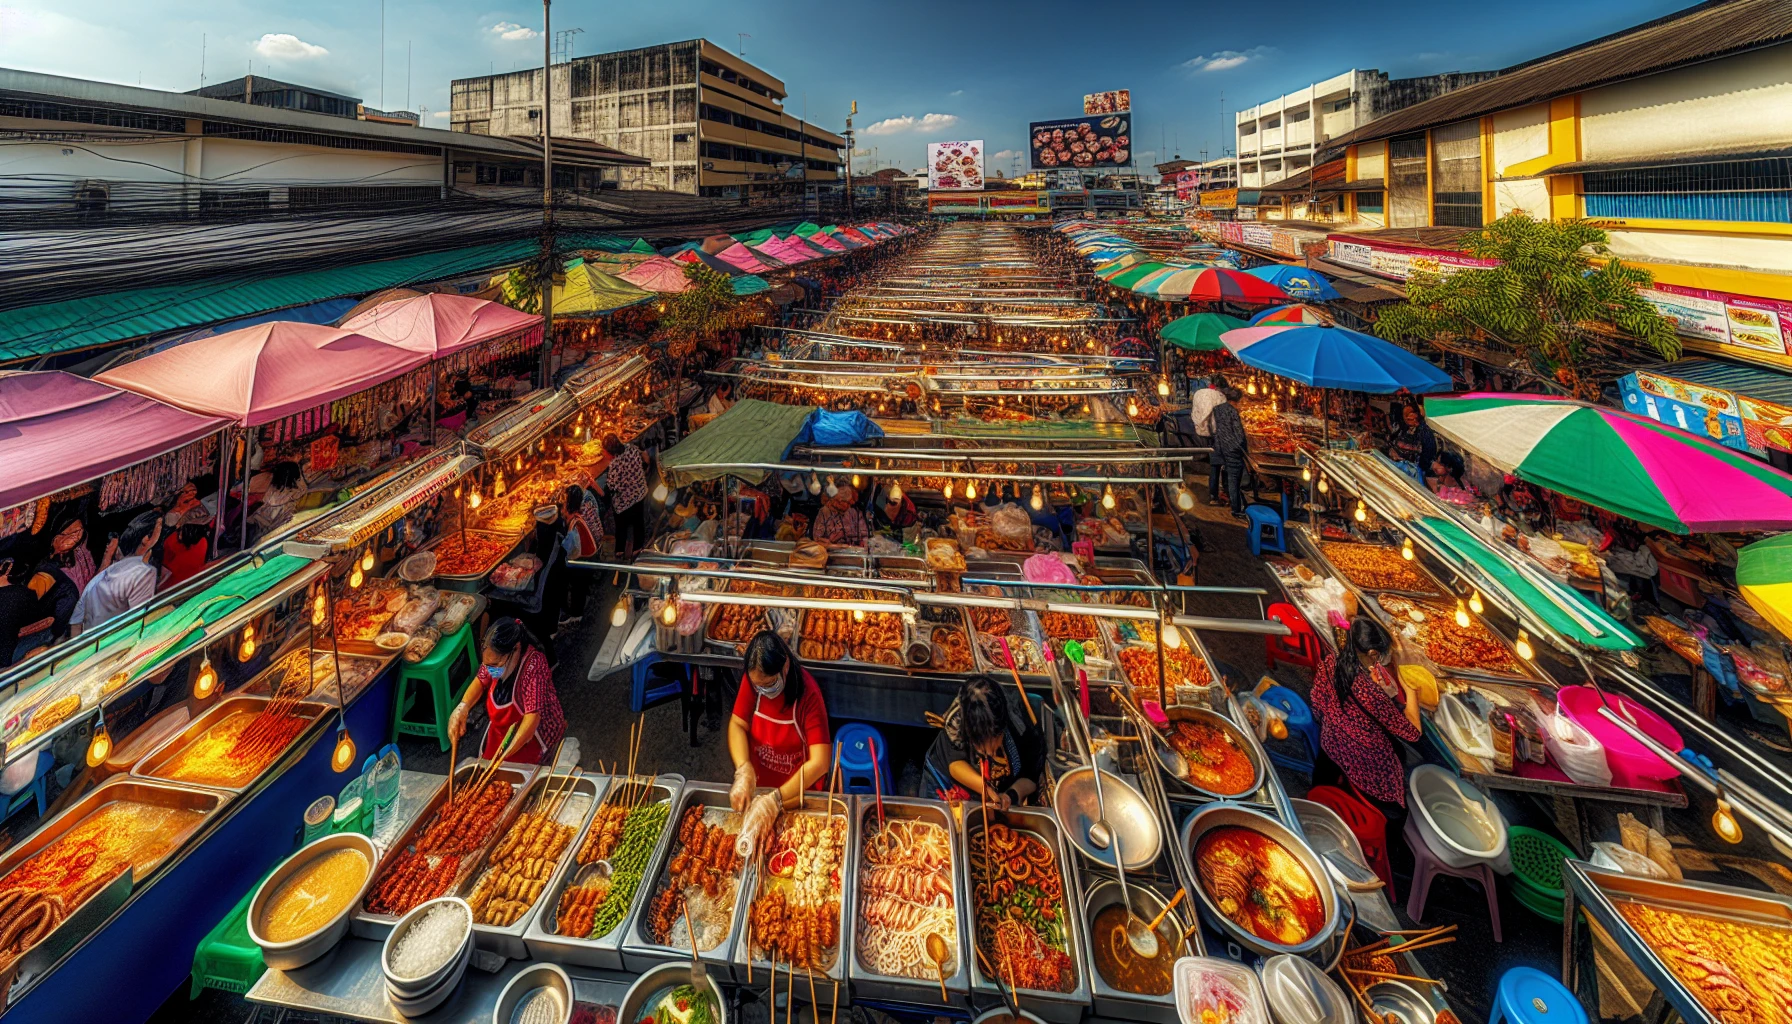 A bustling street food market with colorful food stalls and diverse culinary offerings